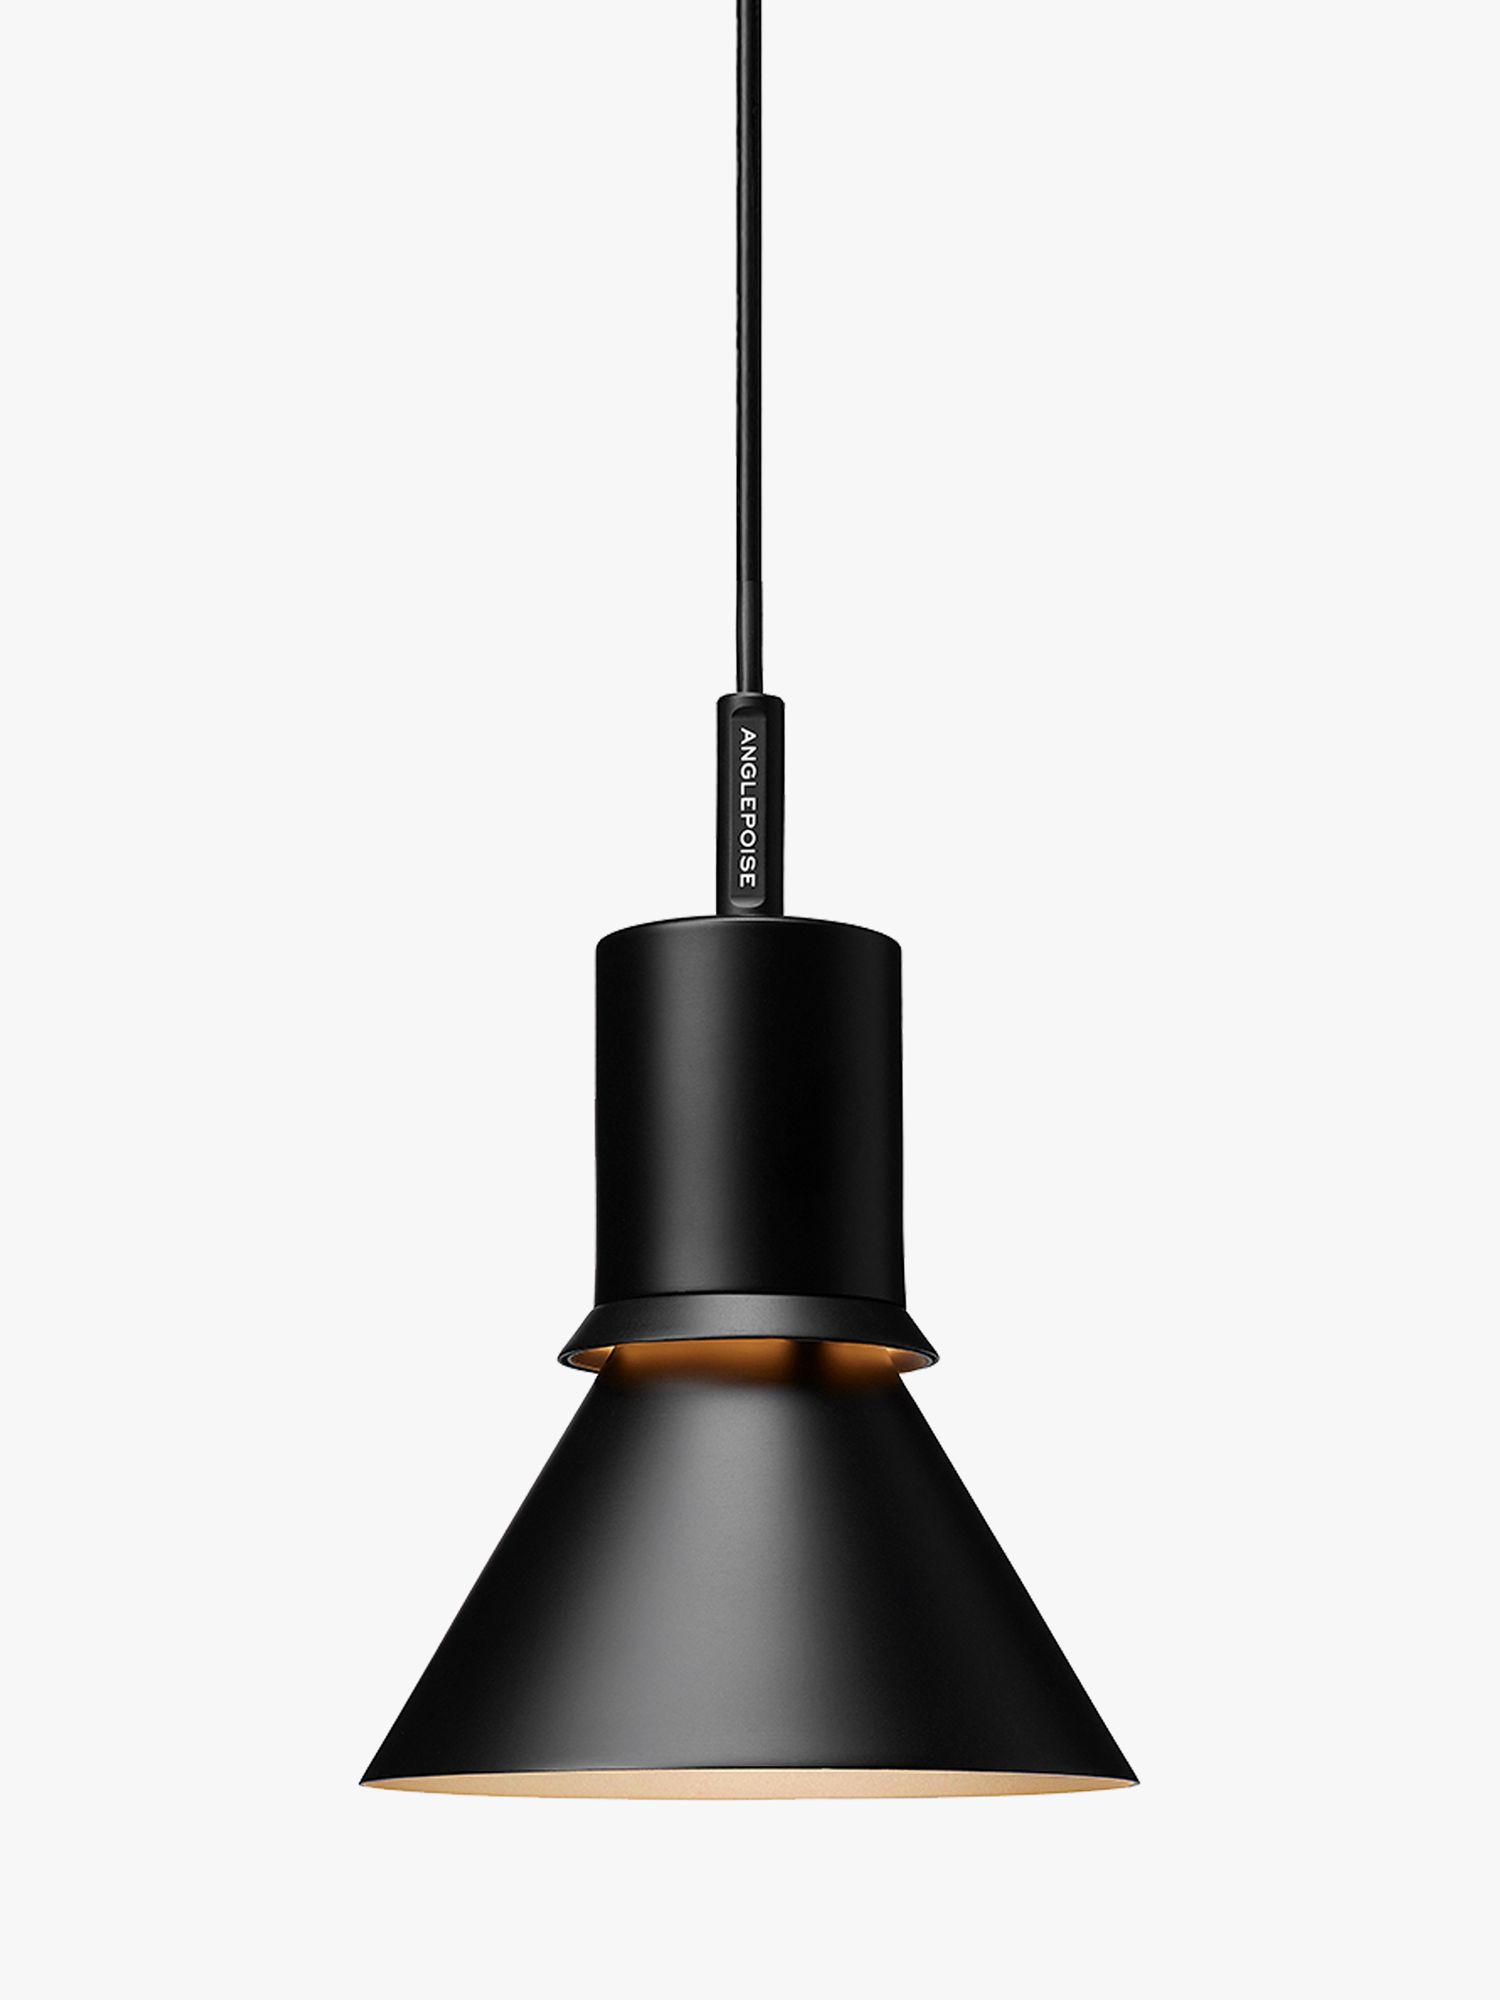 Photo of Anglepoise type 80 ceiling light